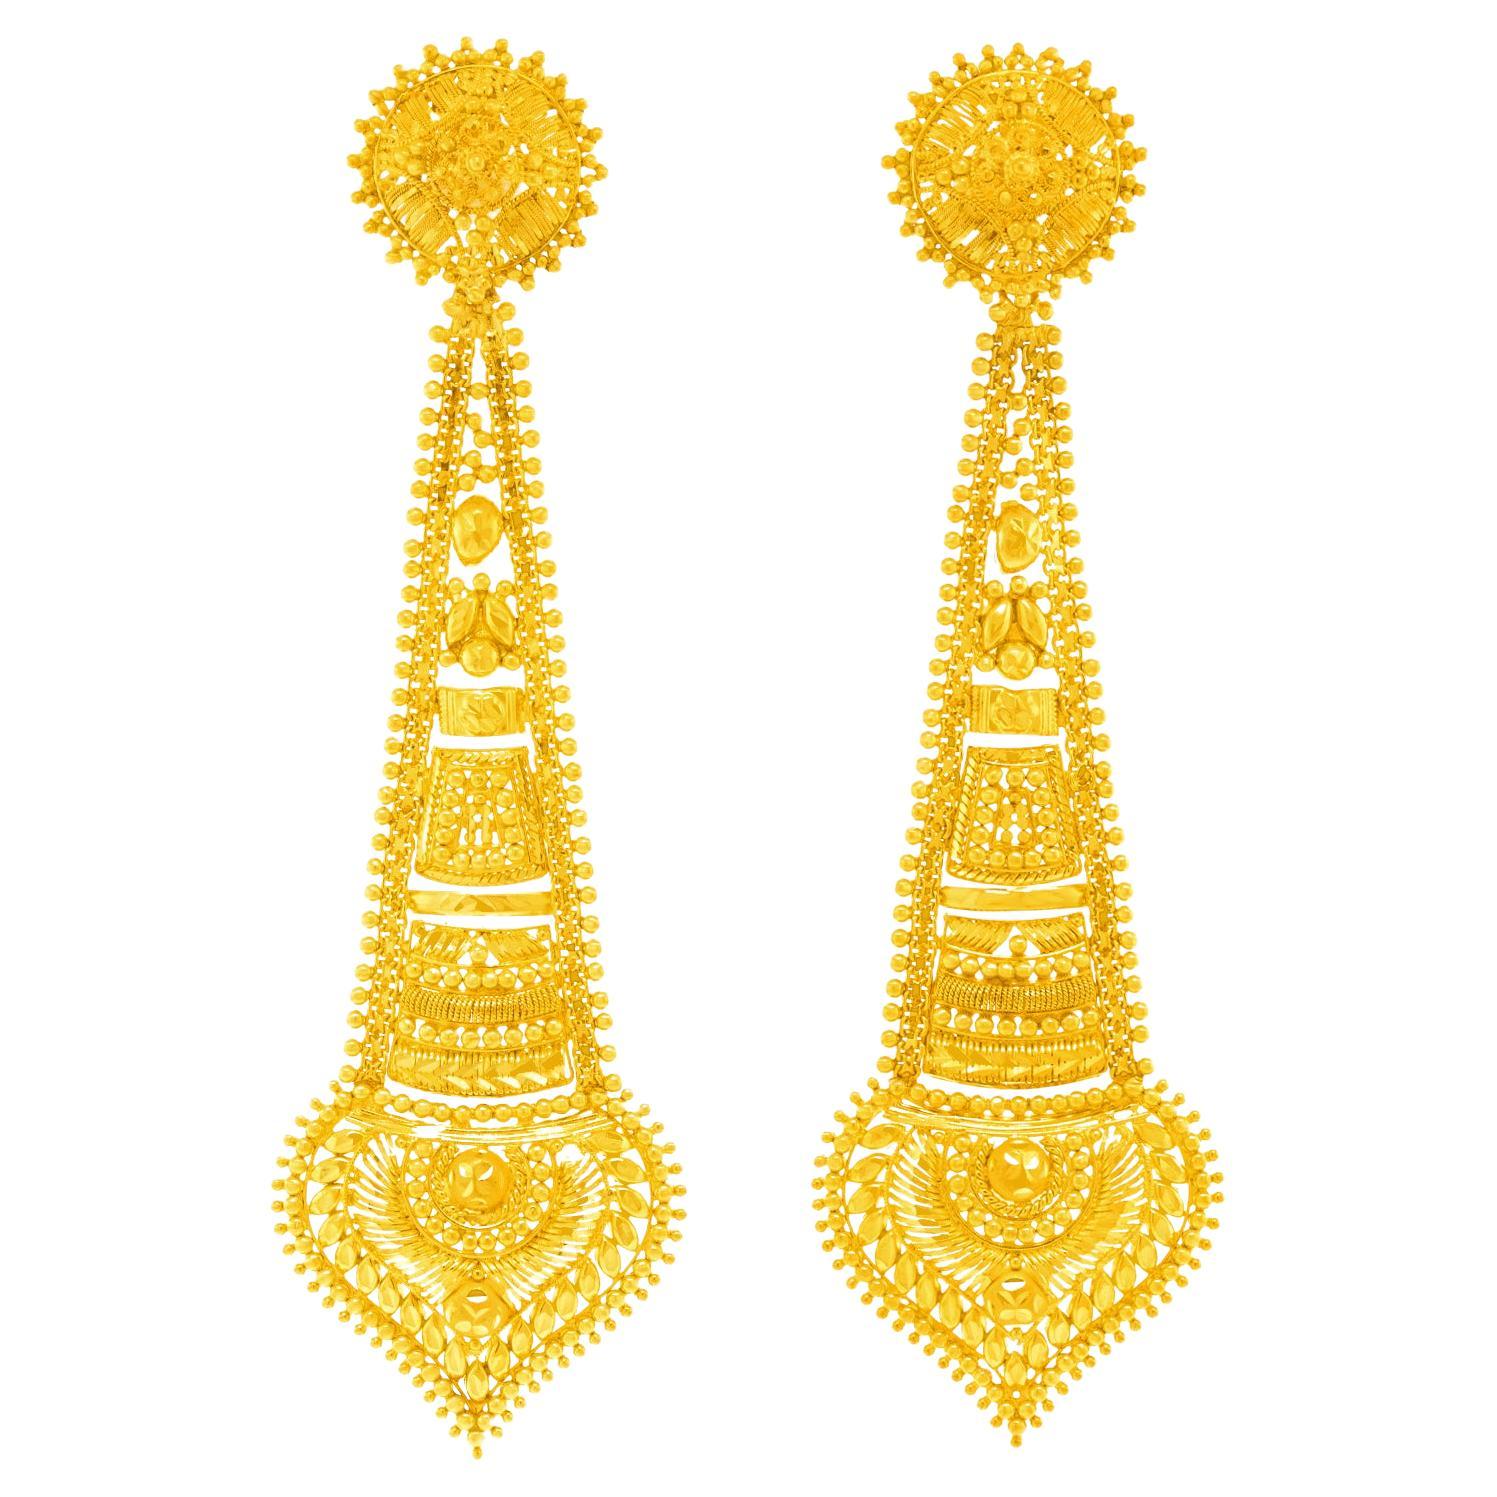 Magnificent High-Karat Gold Earrings c1950s India